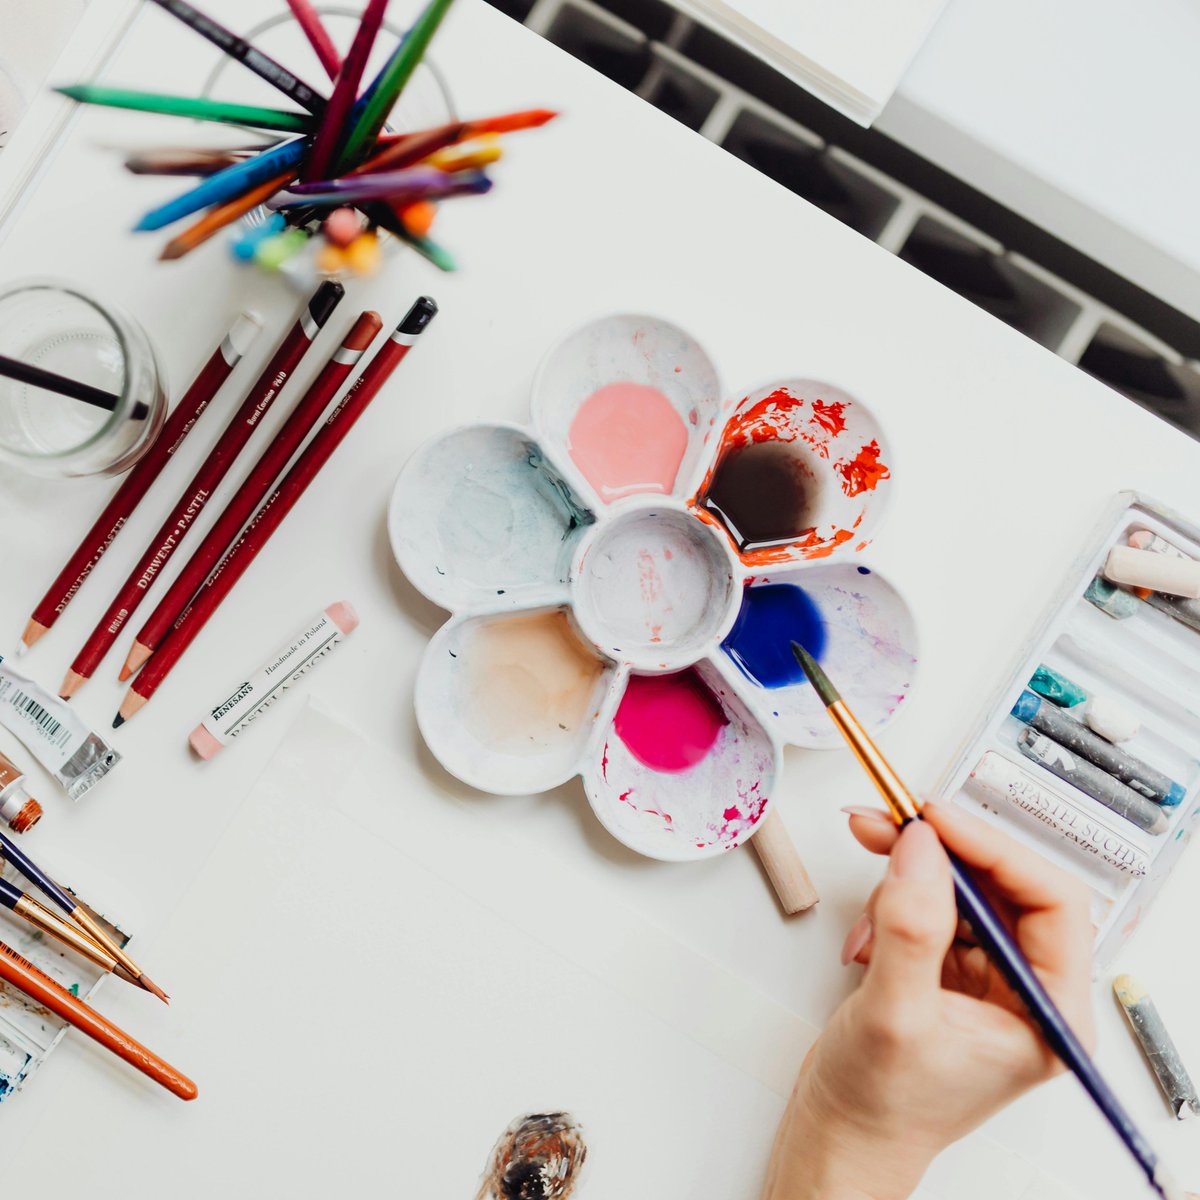 Advance your art skills, or learn a new technique with these recreation art classes:

🎨 Watercolour for Absolute Beginners
🖌️ Introduction to Oil Painting
🖼️ Adventures with Acrylics
✏️ Drawing: People, Faces & Figure Essentials

Register at tinyurl.com/yc5fuats #WhiteRockBC